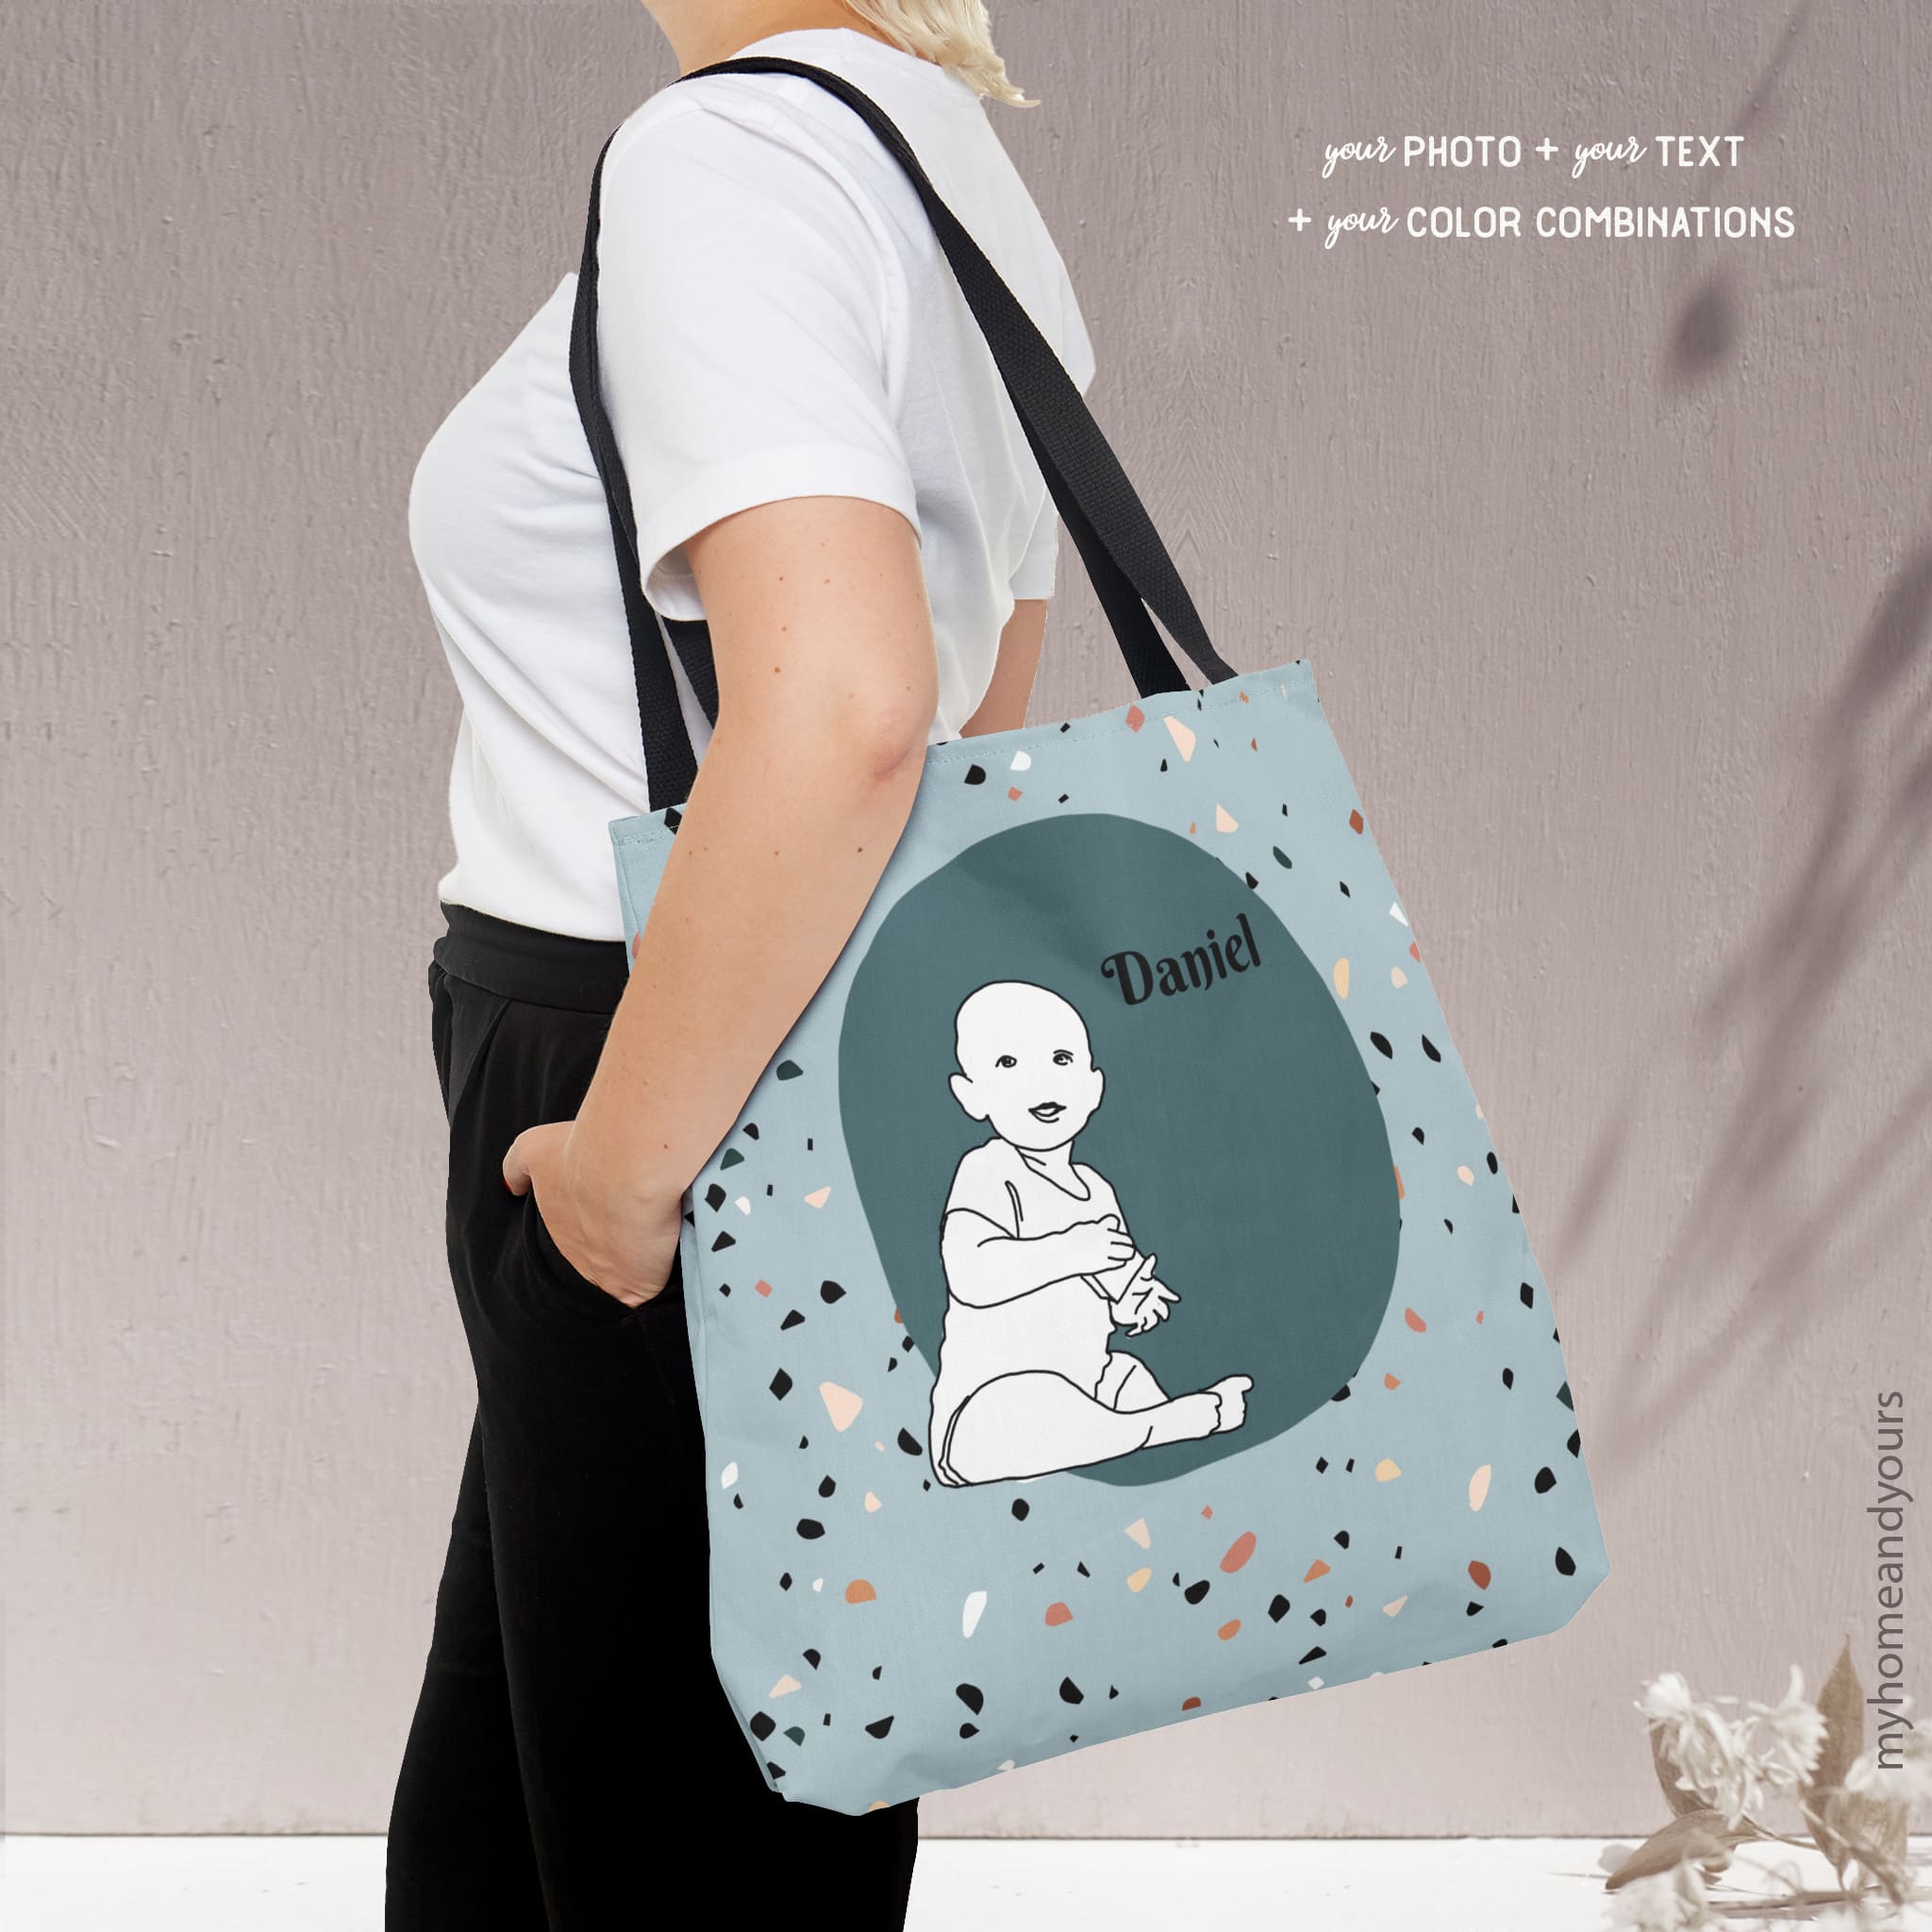 New mom custom baby blue tote bag personalized with line art portrait illustration from photo of the newborn on colorful back ground and terrazzo pattern text